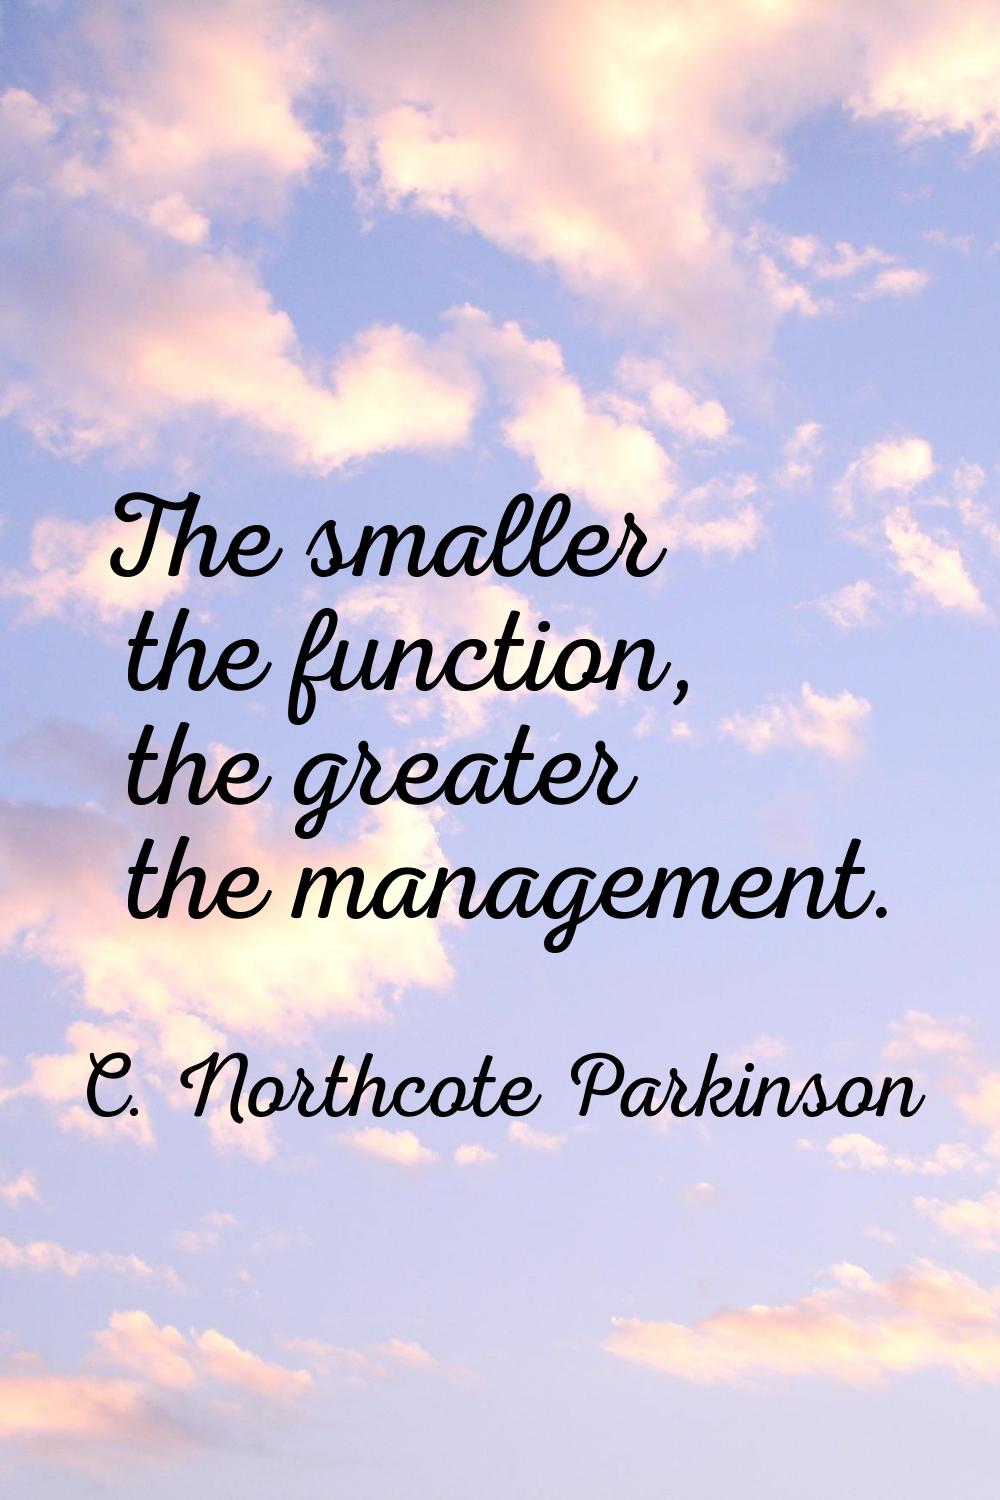 The smaller the function, the greater the management.